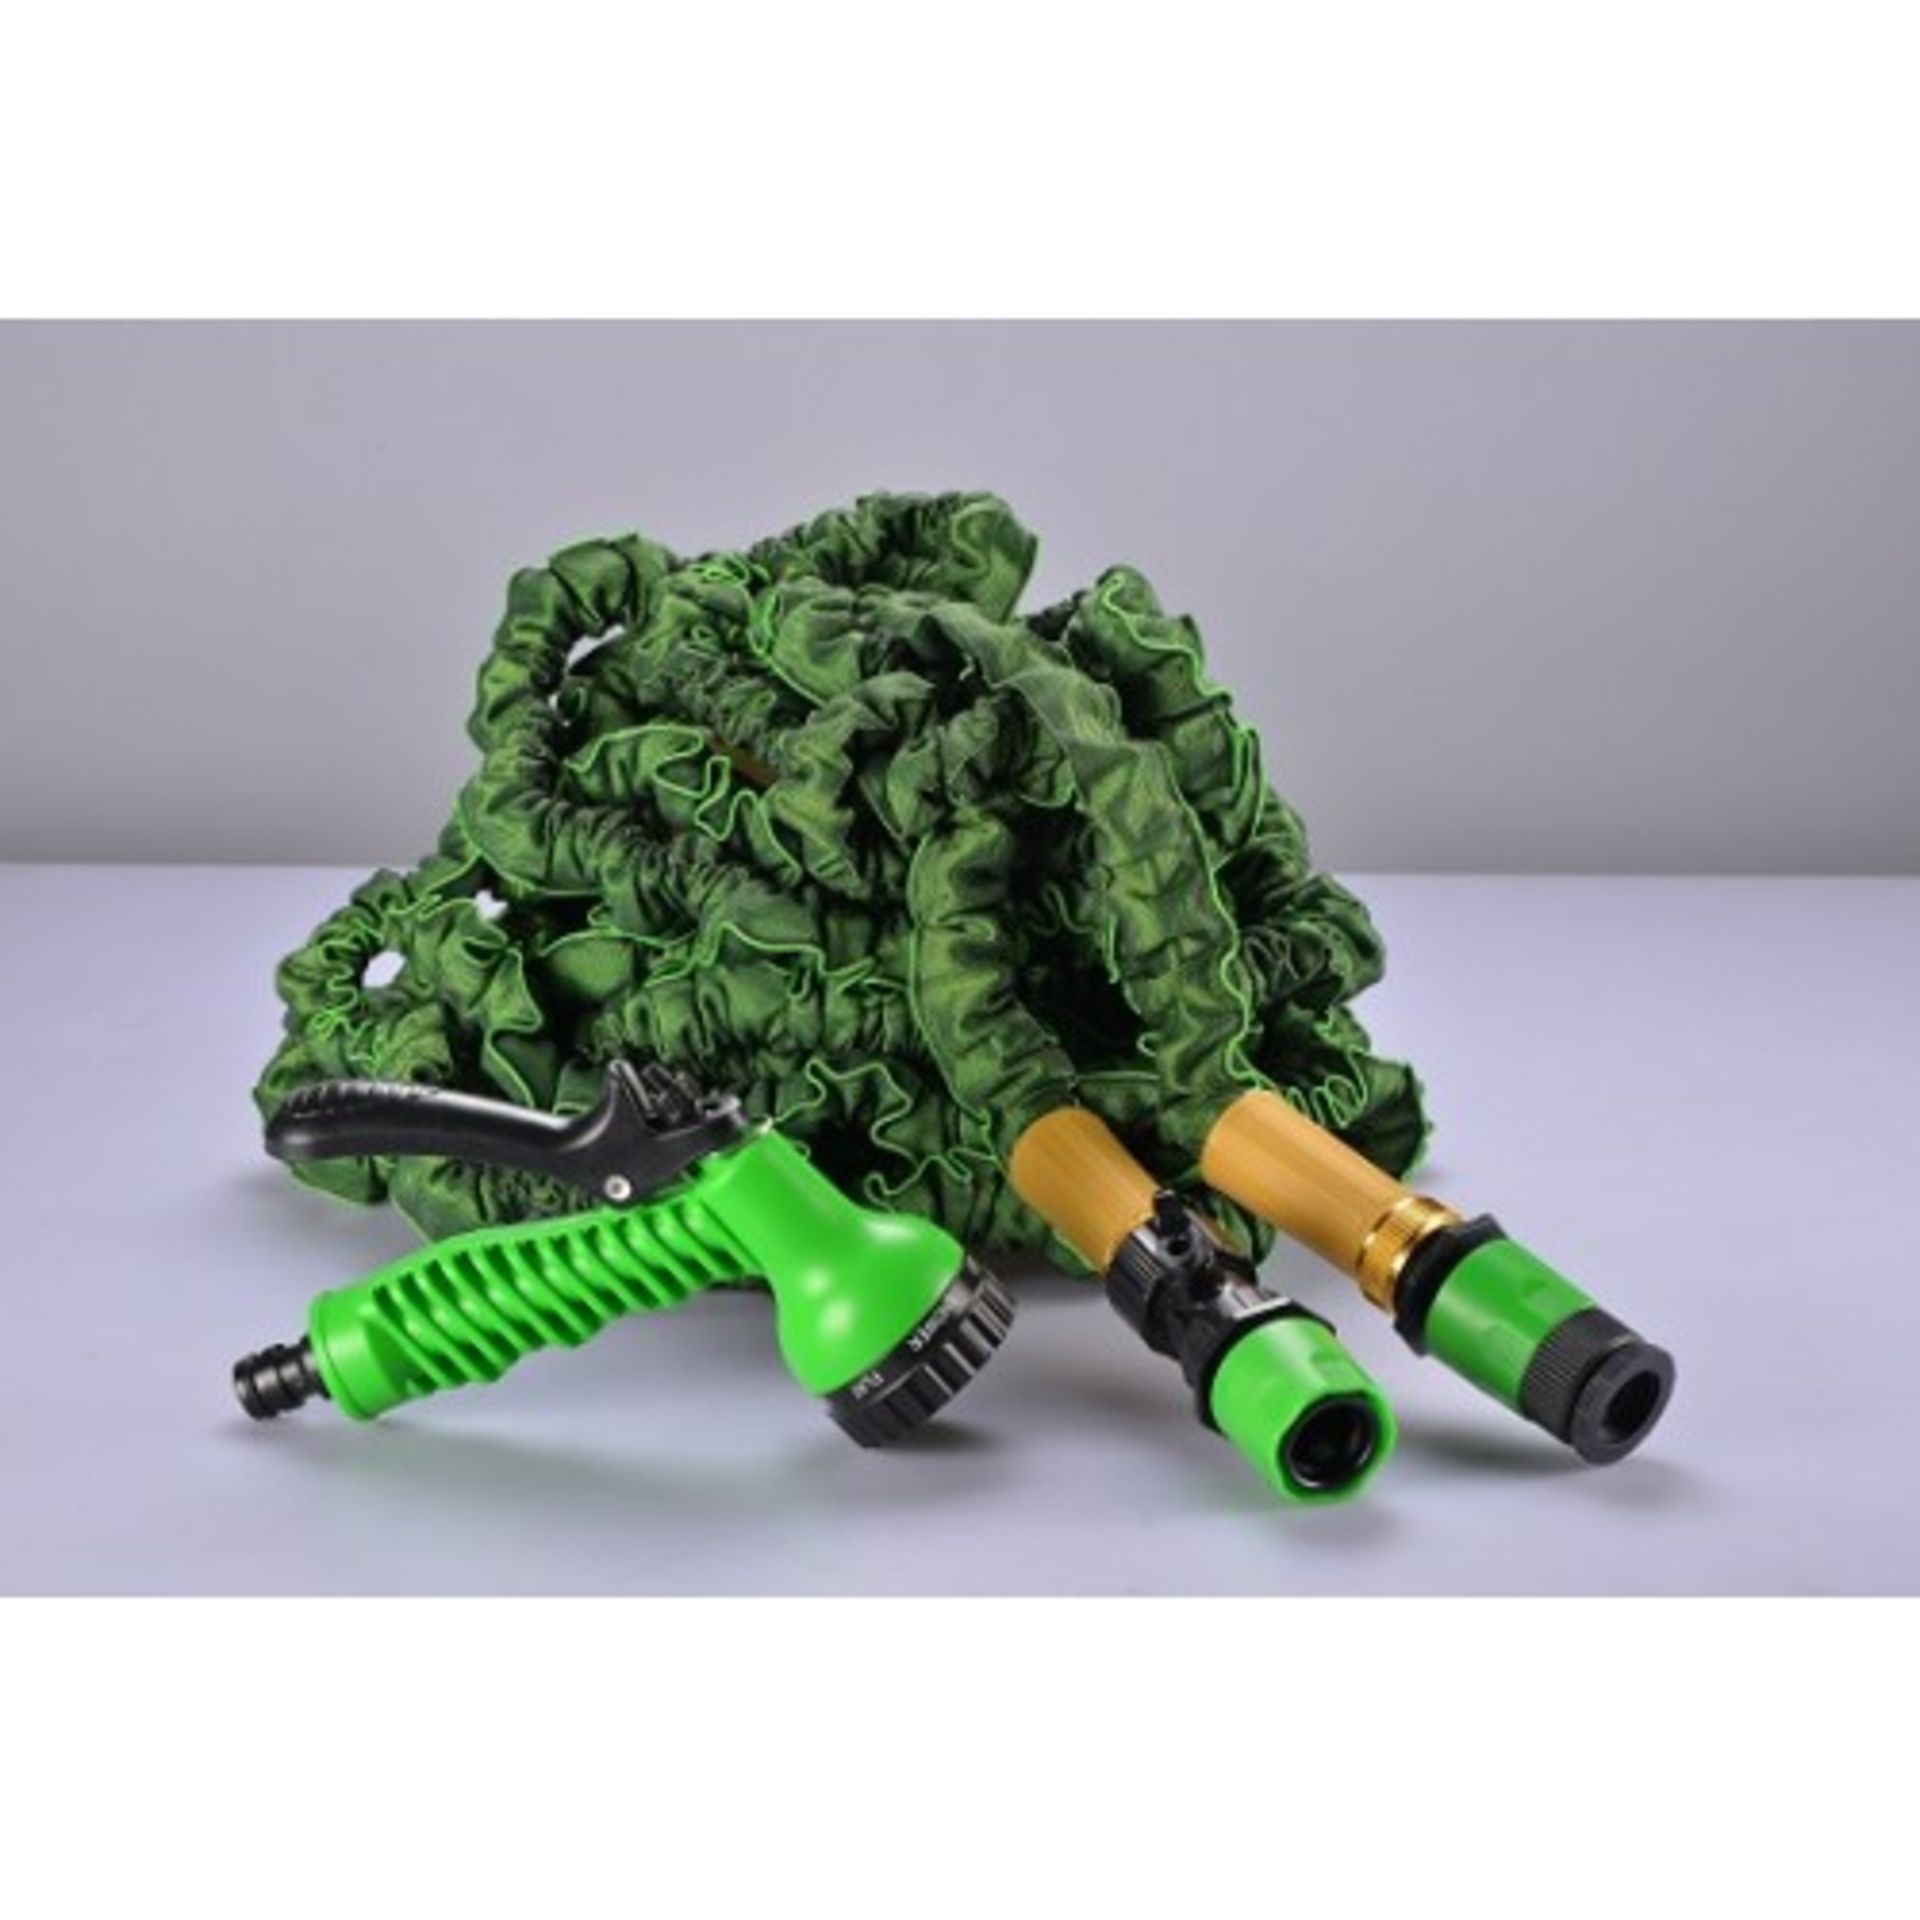 V Brand New 75 Foot Green Stretchy Hose With 7 In 1 Spray Nozzle ISP £19.99 (Qudos Direct)